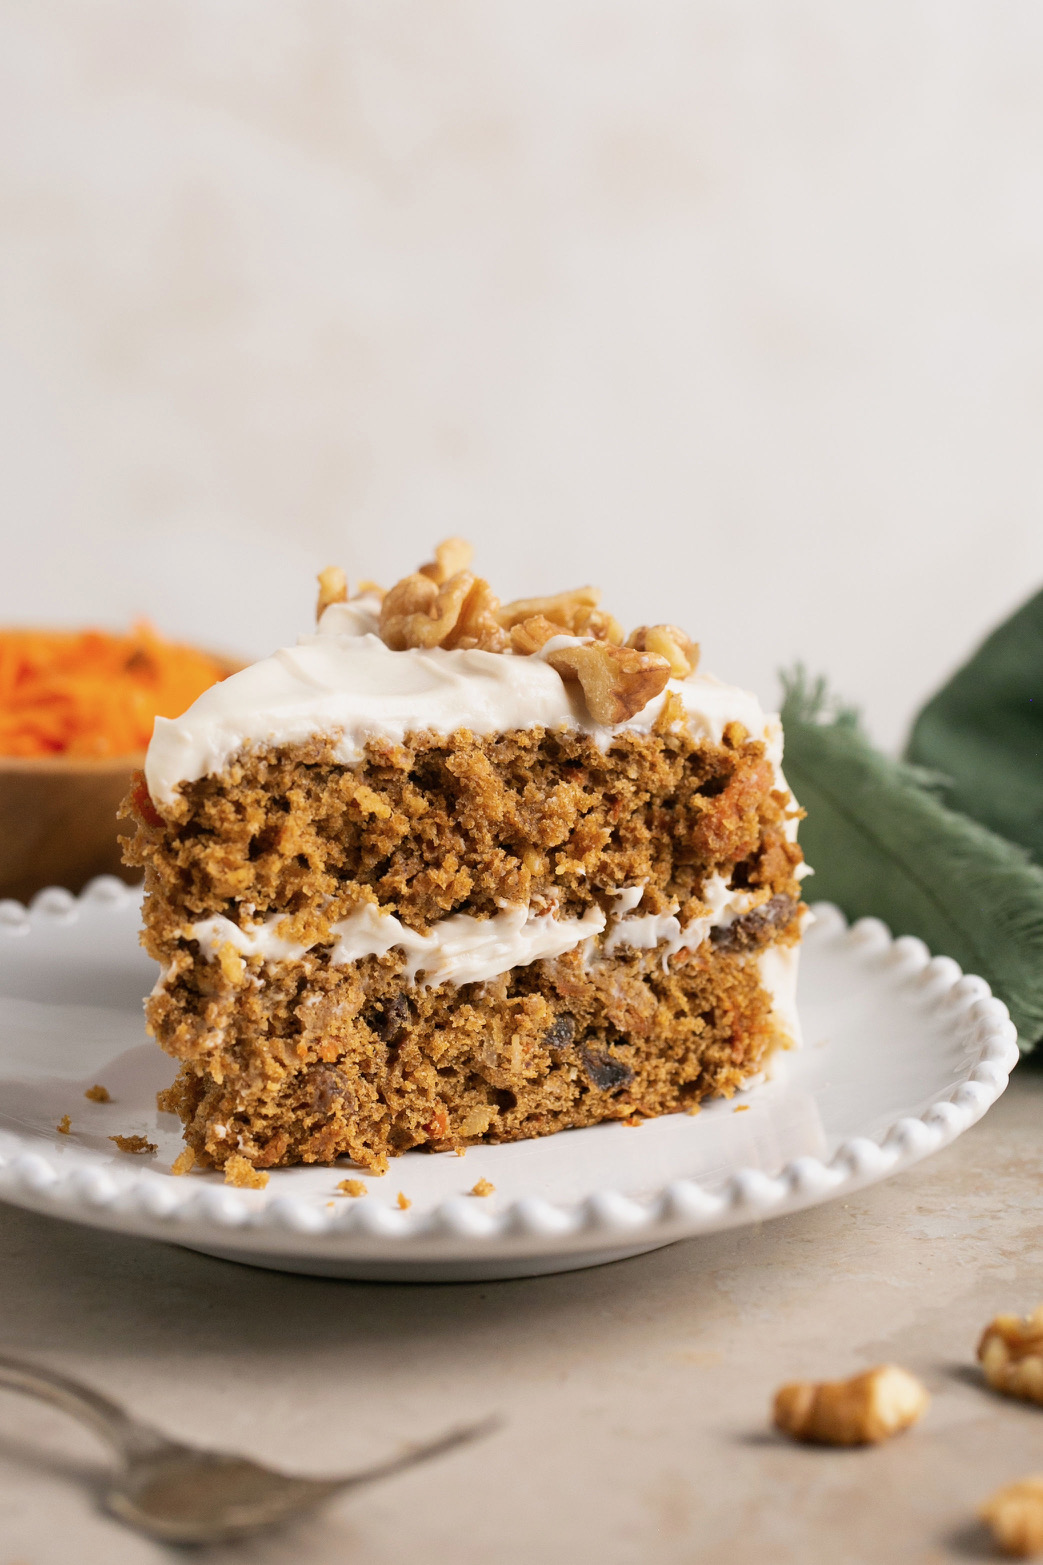 a slice of gluten free carrot cake on a white dish topped with walnuts